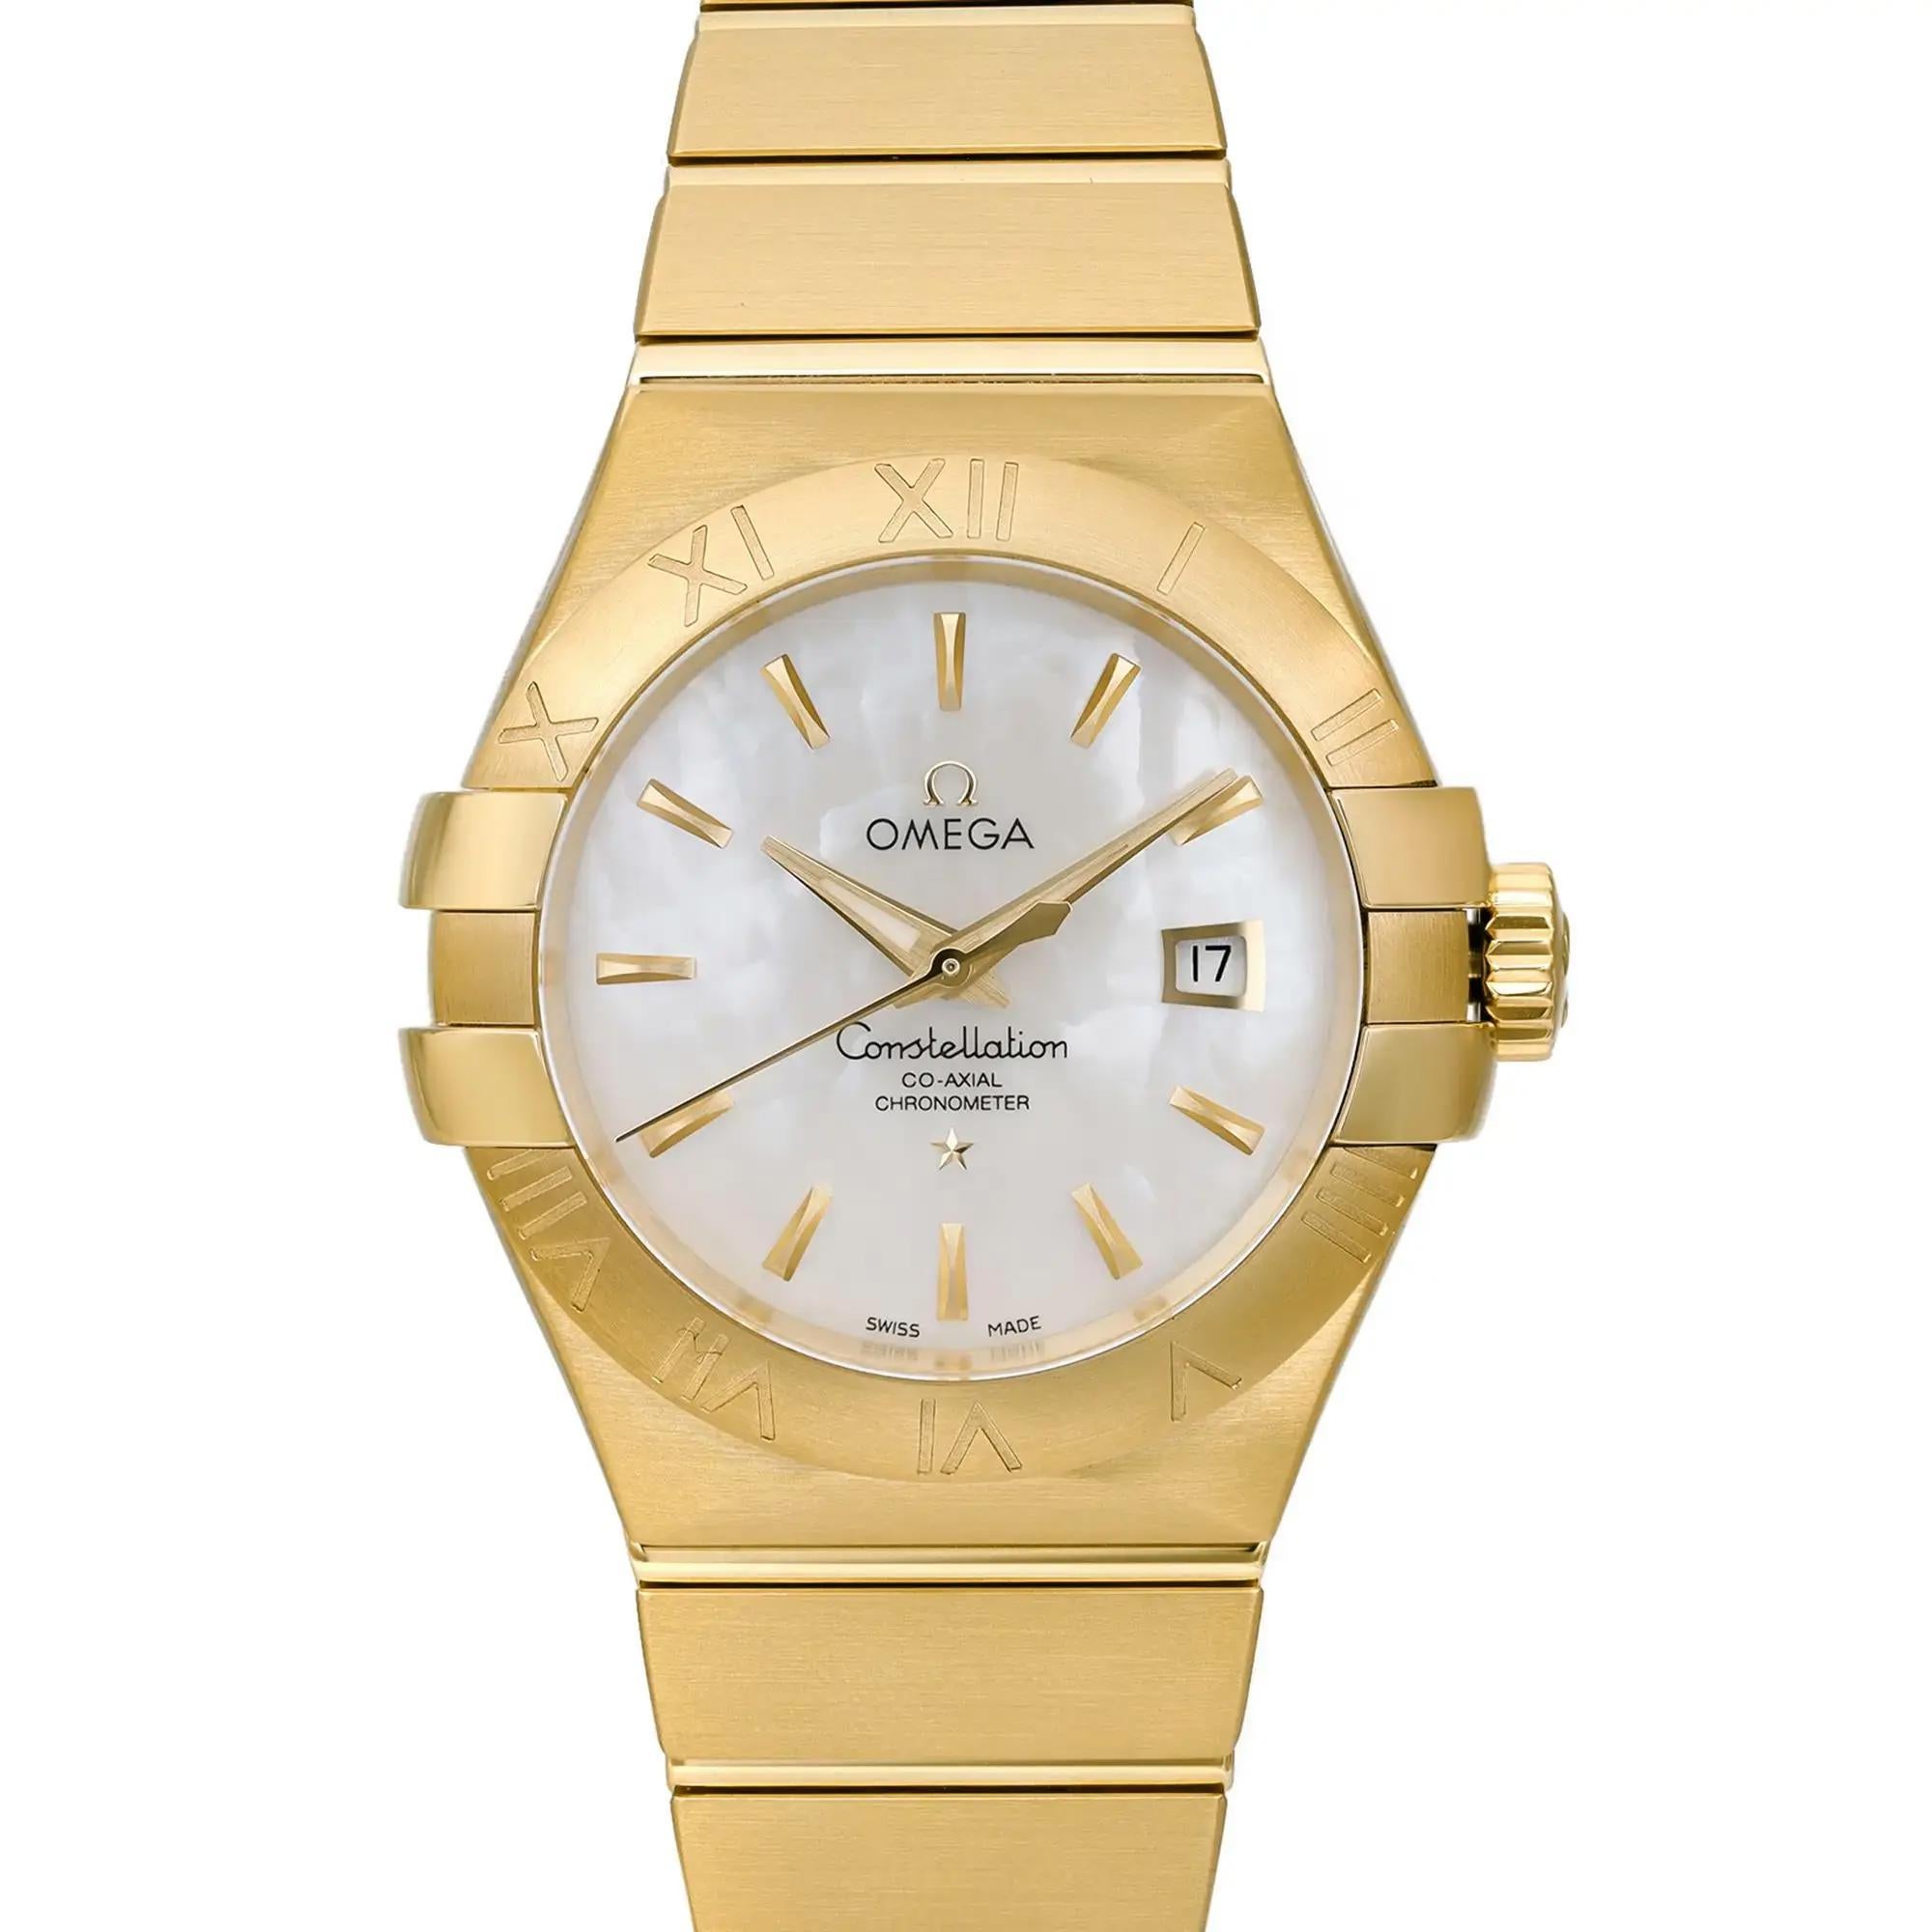 Unworn. Comes with the original box and pictogram card. MSRP $24100

Brand & Model Information:
Brand: OMEGA
Model: Omega Constellation
Model Number: 123.50.31.20.05.002

Specifications:
Type: Wristwatch
Department: Women
Movement: Mechanical